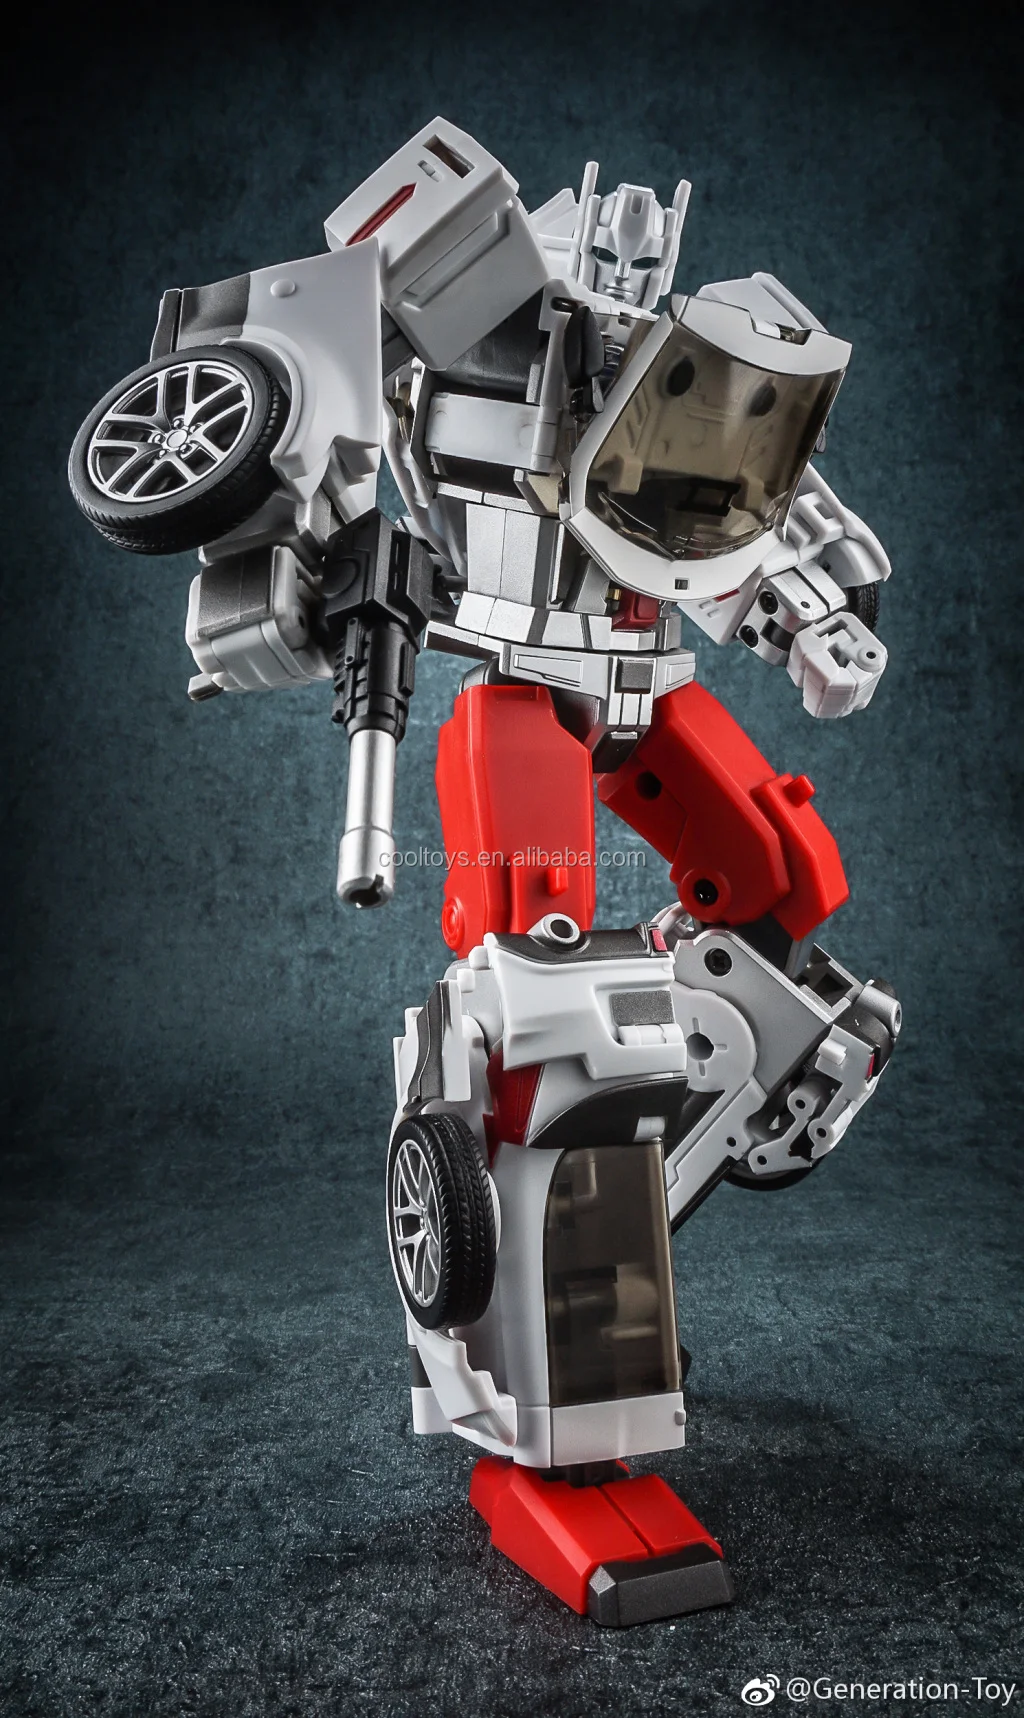 Details about   Generation toy GT-08A Guardian Sarge G1 Defensor Streetwise GT08A Figures toy 